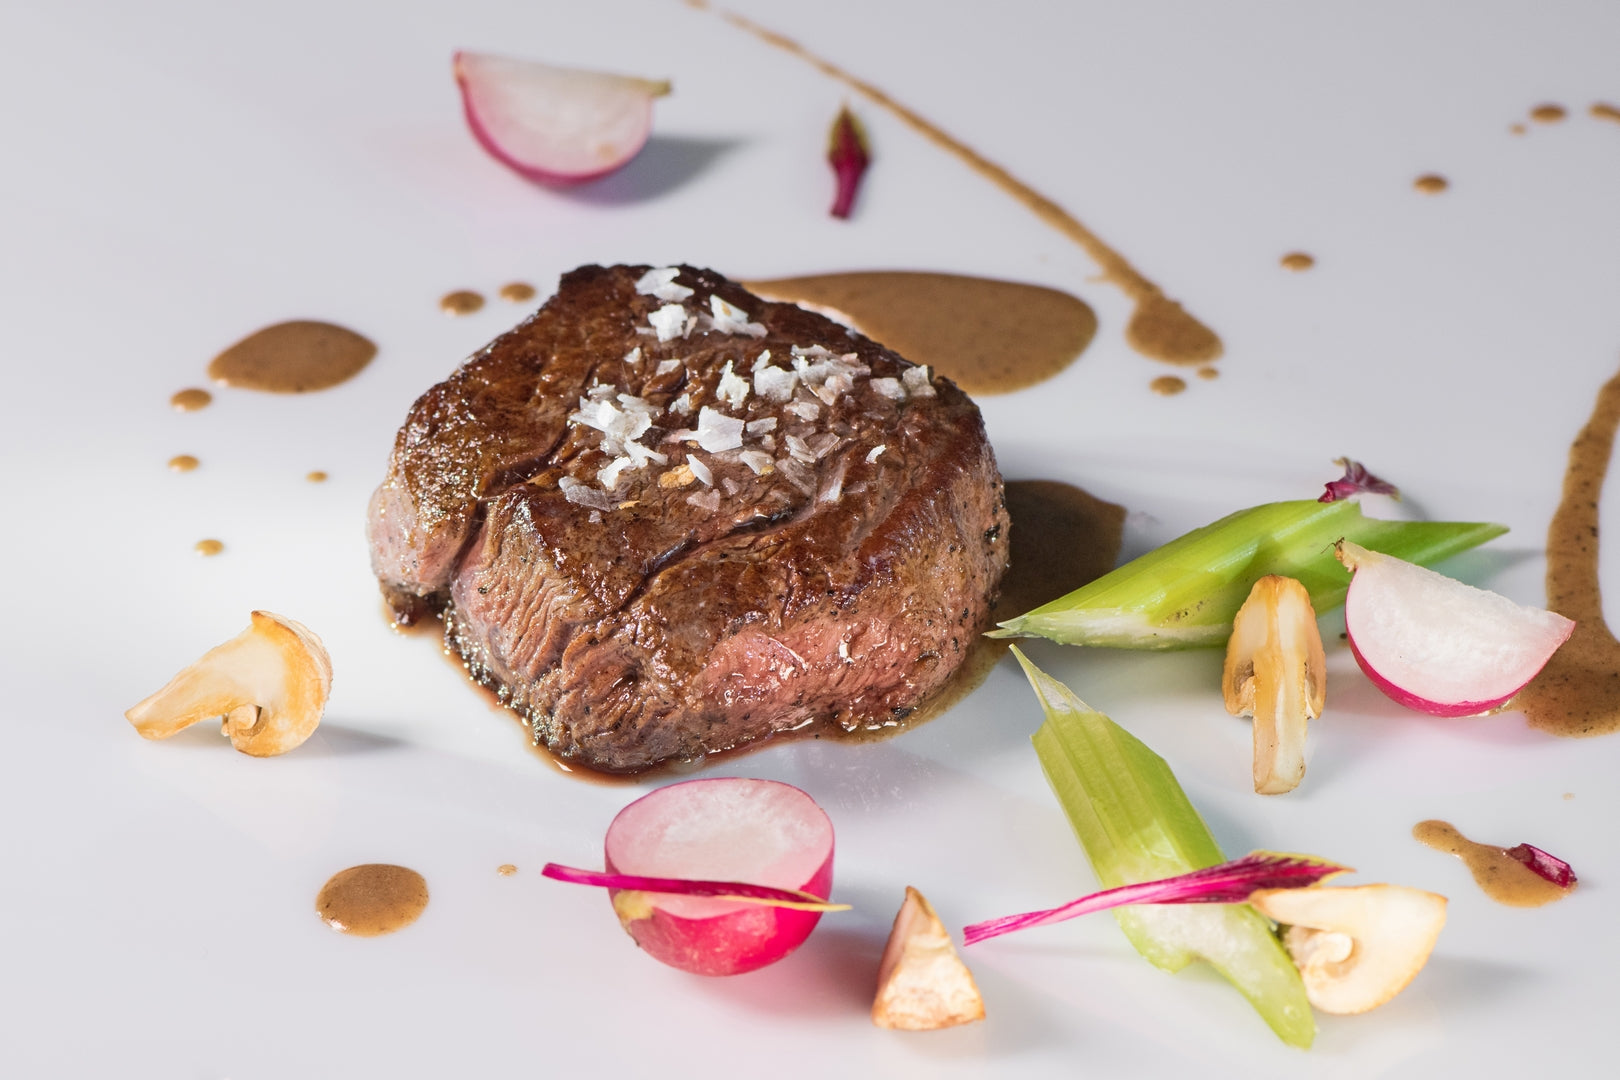 Beef tenderloin with White or Black minced truffle